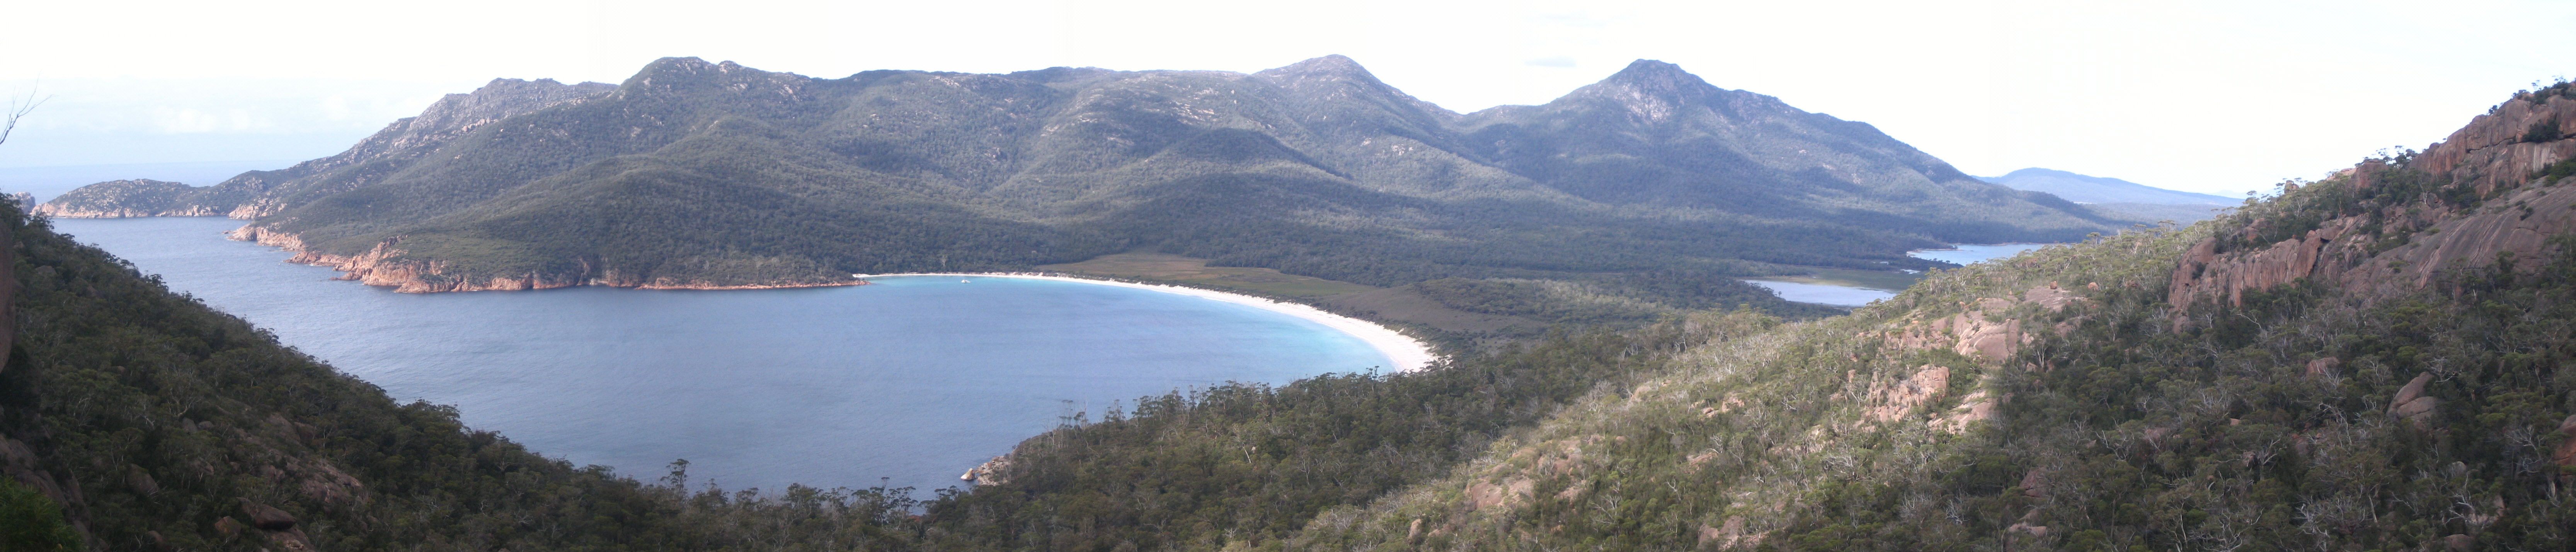 Wineglass Bay is the secluded bay in the centre of this photo, taken from a lookout point above it to the west. - rt) ot. de LW rt Ho A

 

fo oy LP
-

i 1 ar [

 

 

. ow i] Ls
elle |
: x 3
3 : = -
8 ;
\., r
| {